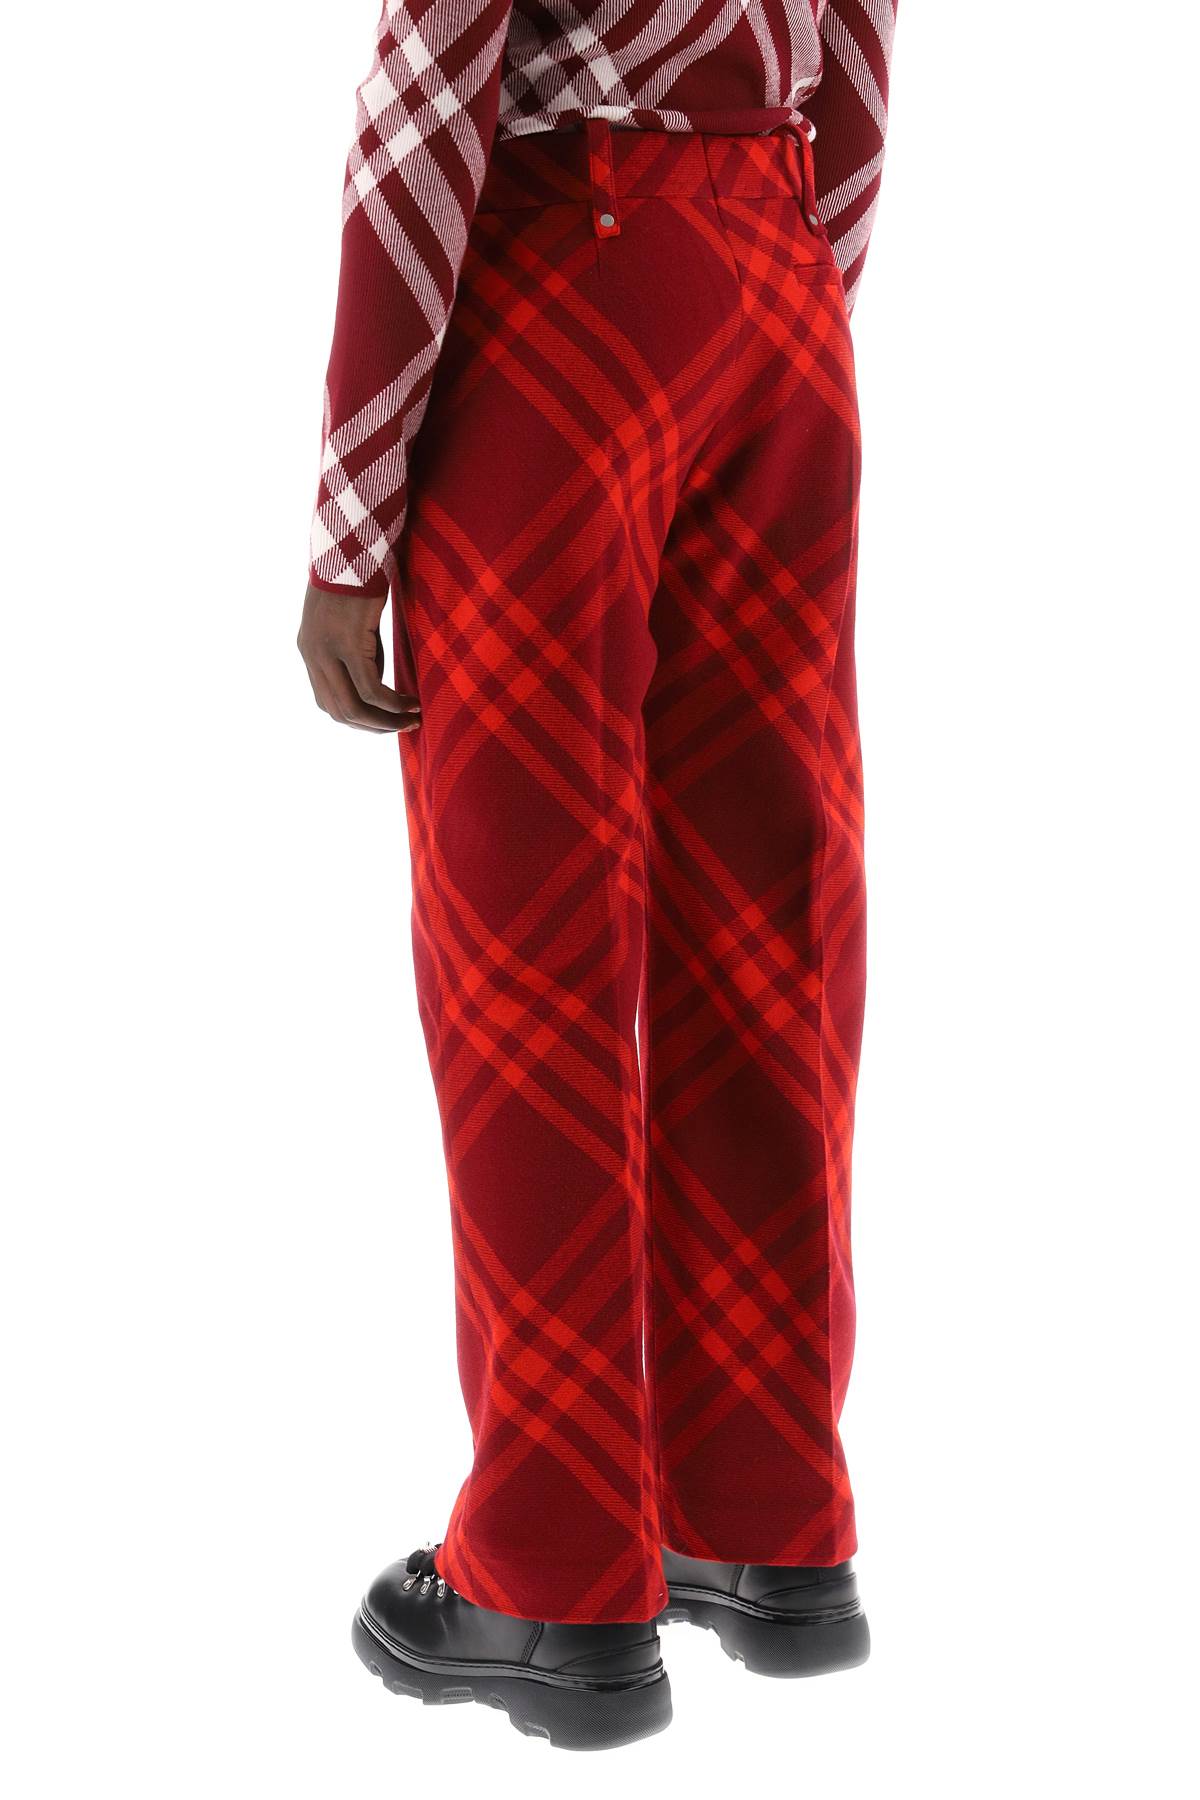 Shop Burberry Men's Iconic Red Check Wool Pants For The Fall/winter Season